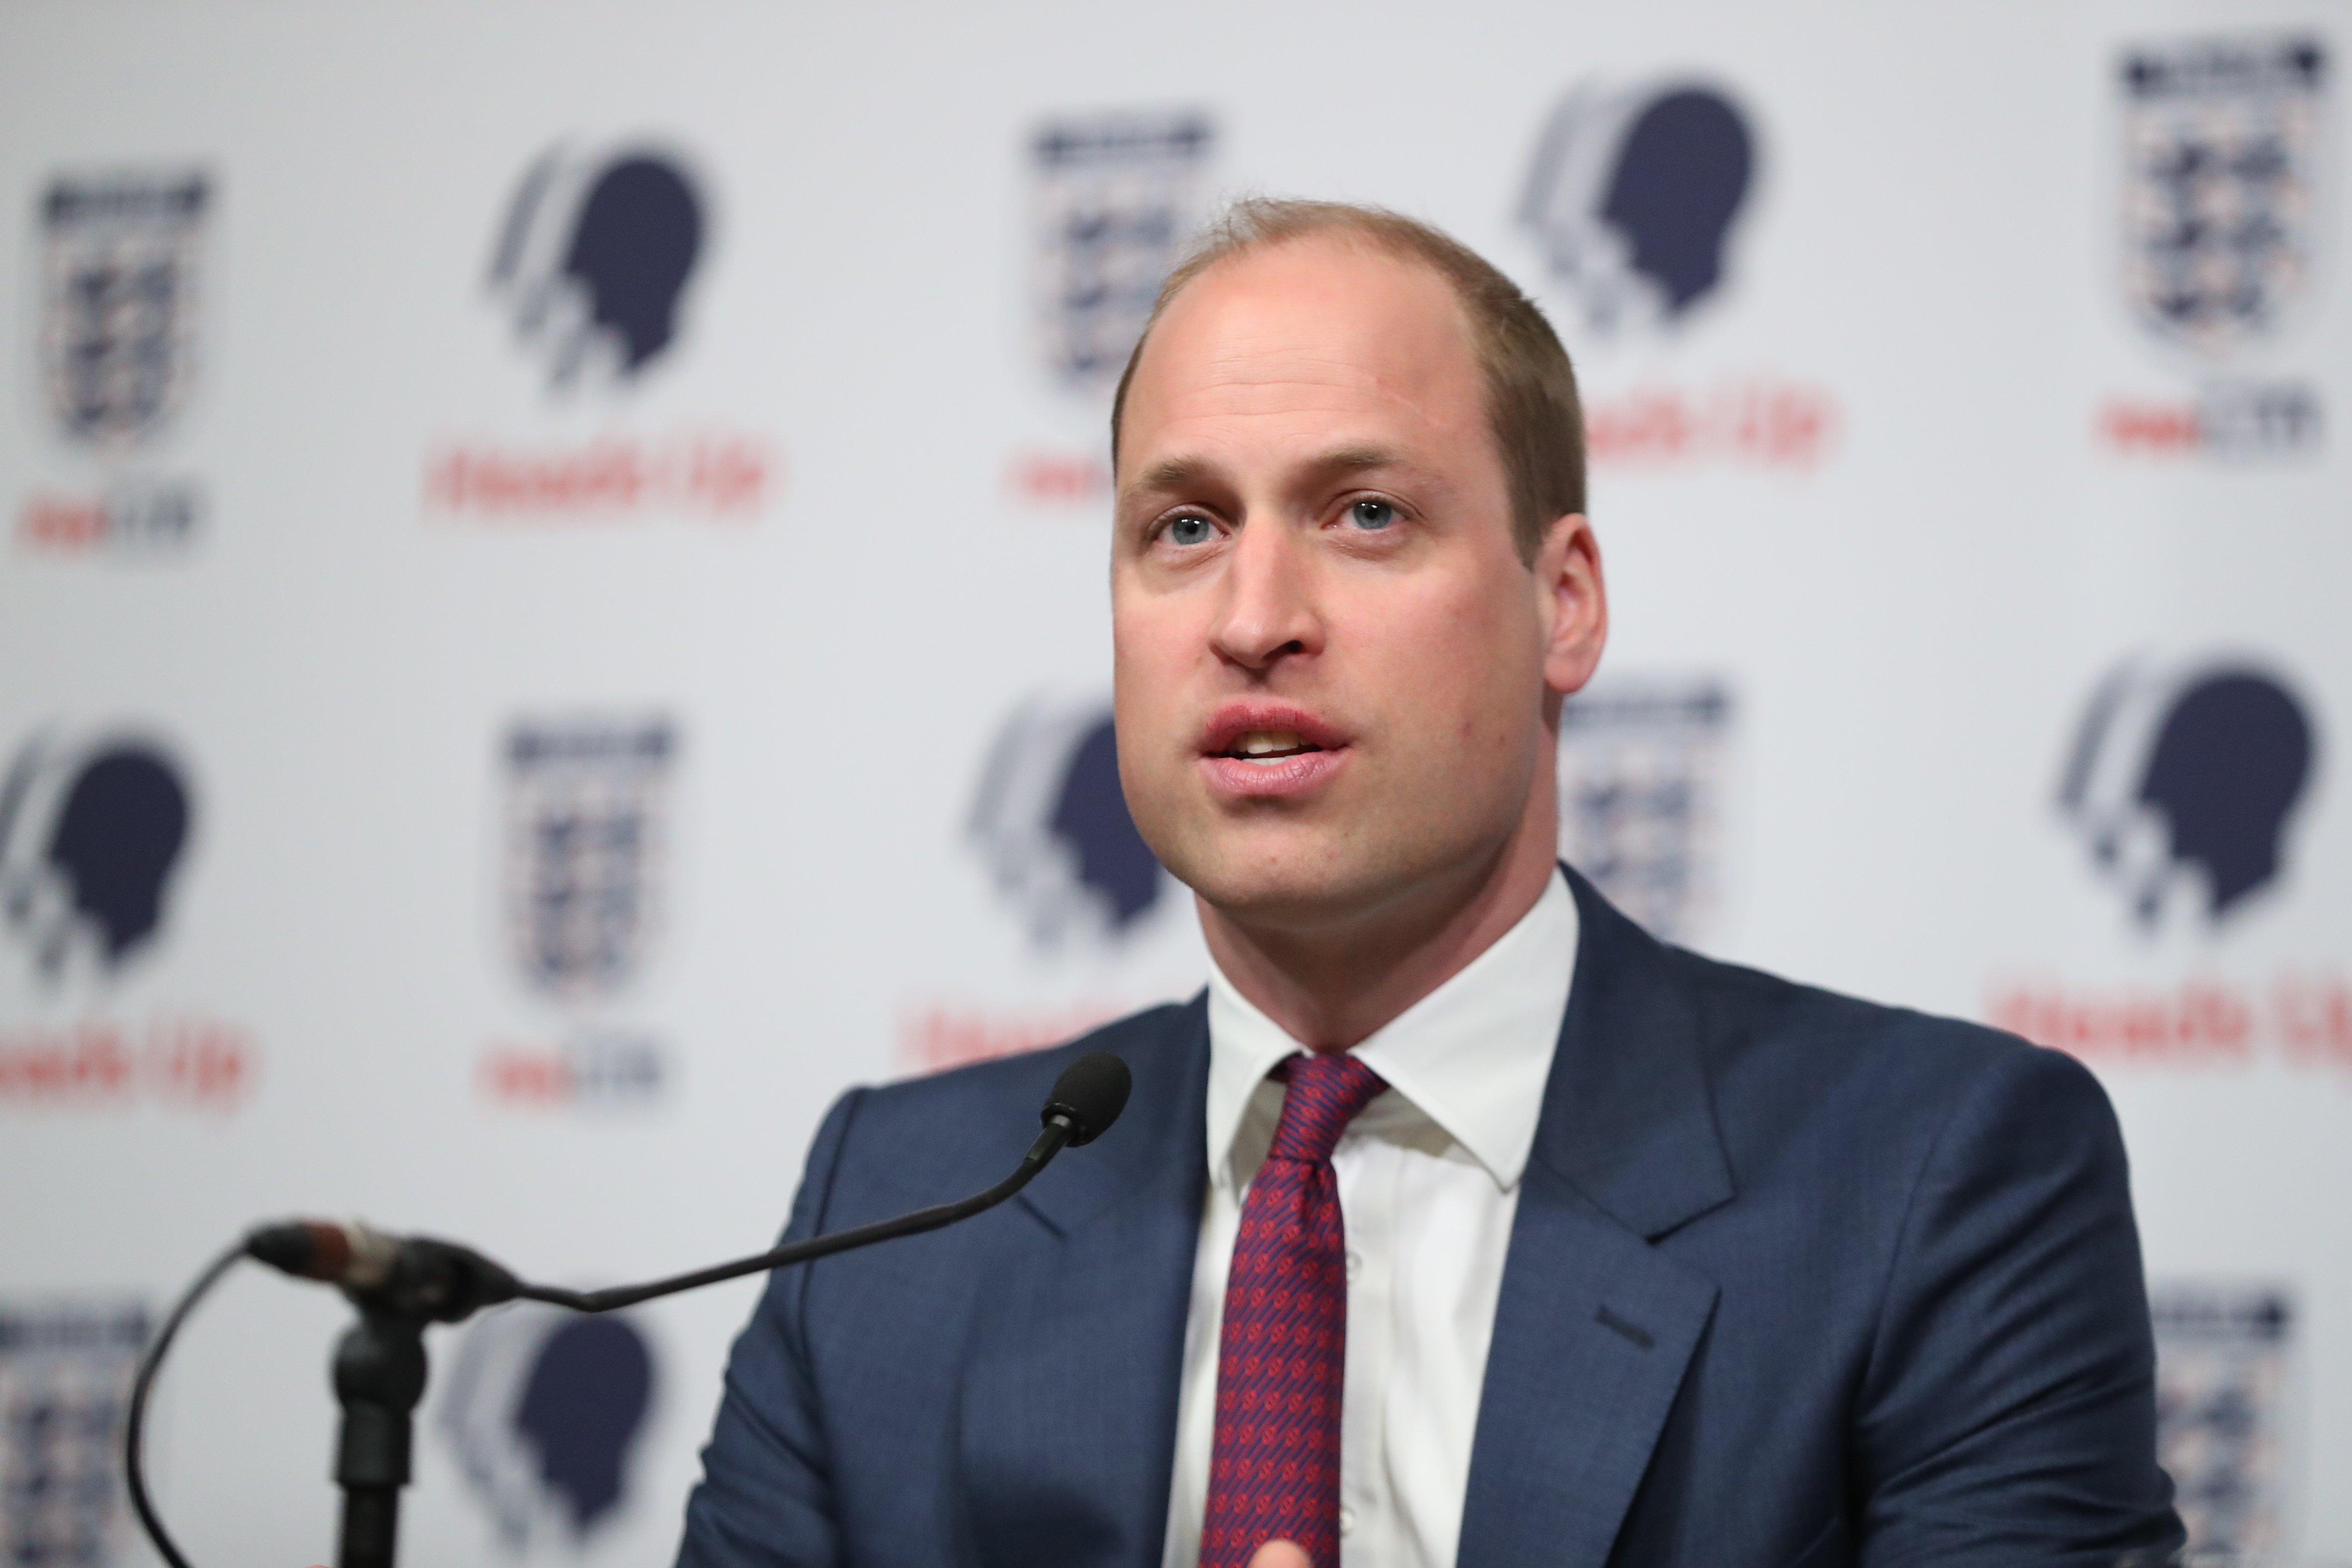 Prince William at the launch of a new mental health campaign at Wembley Stadium | Photo: Getty Images